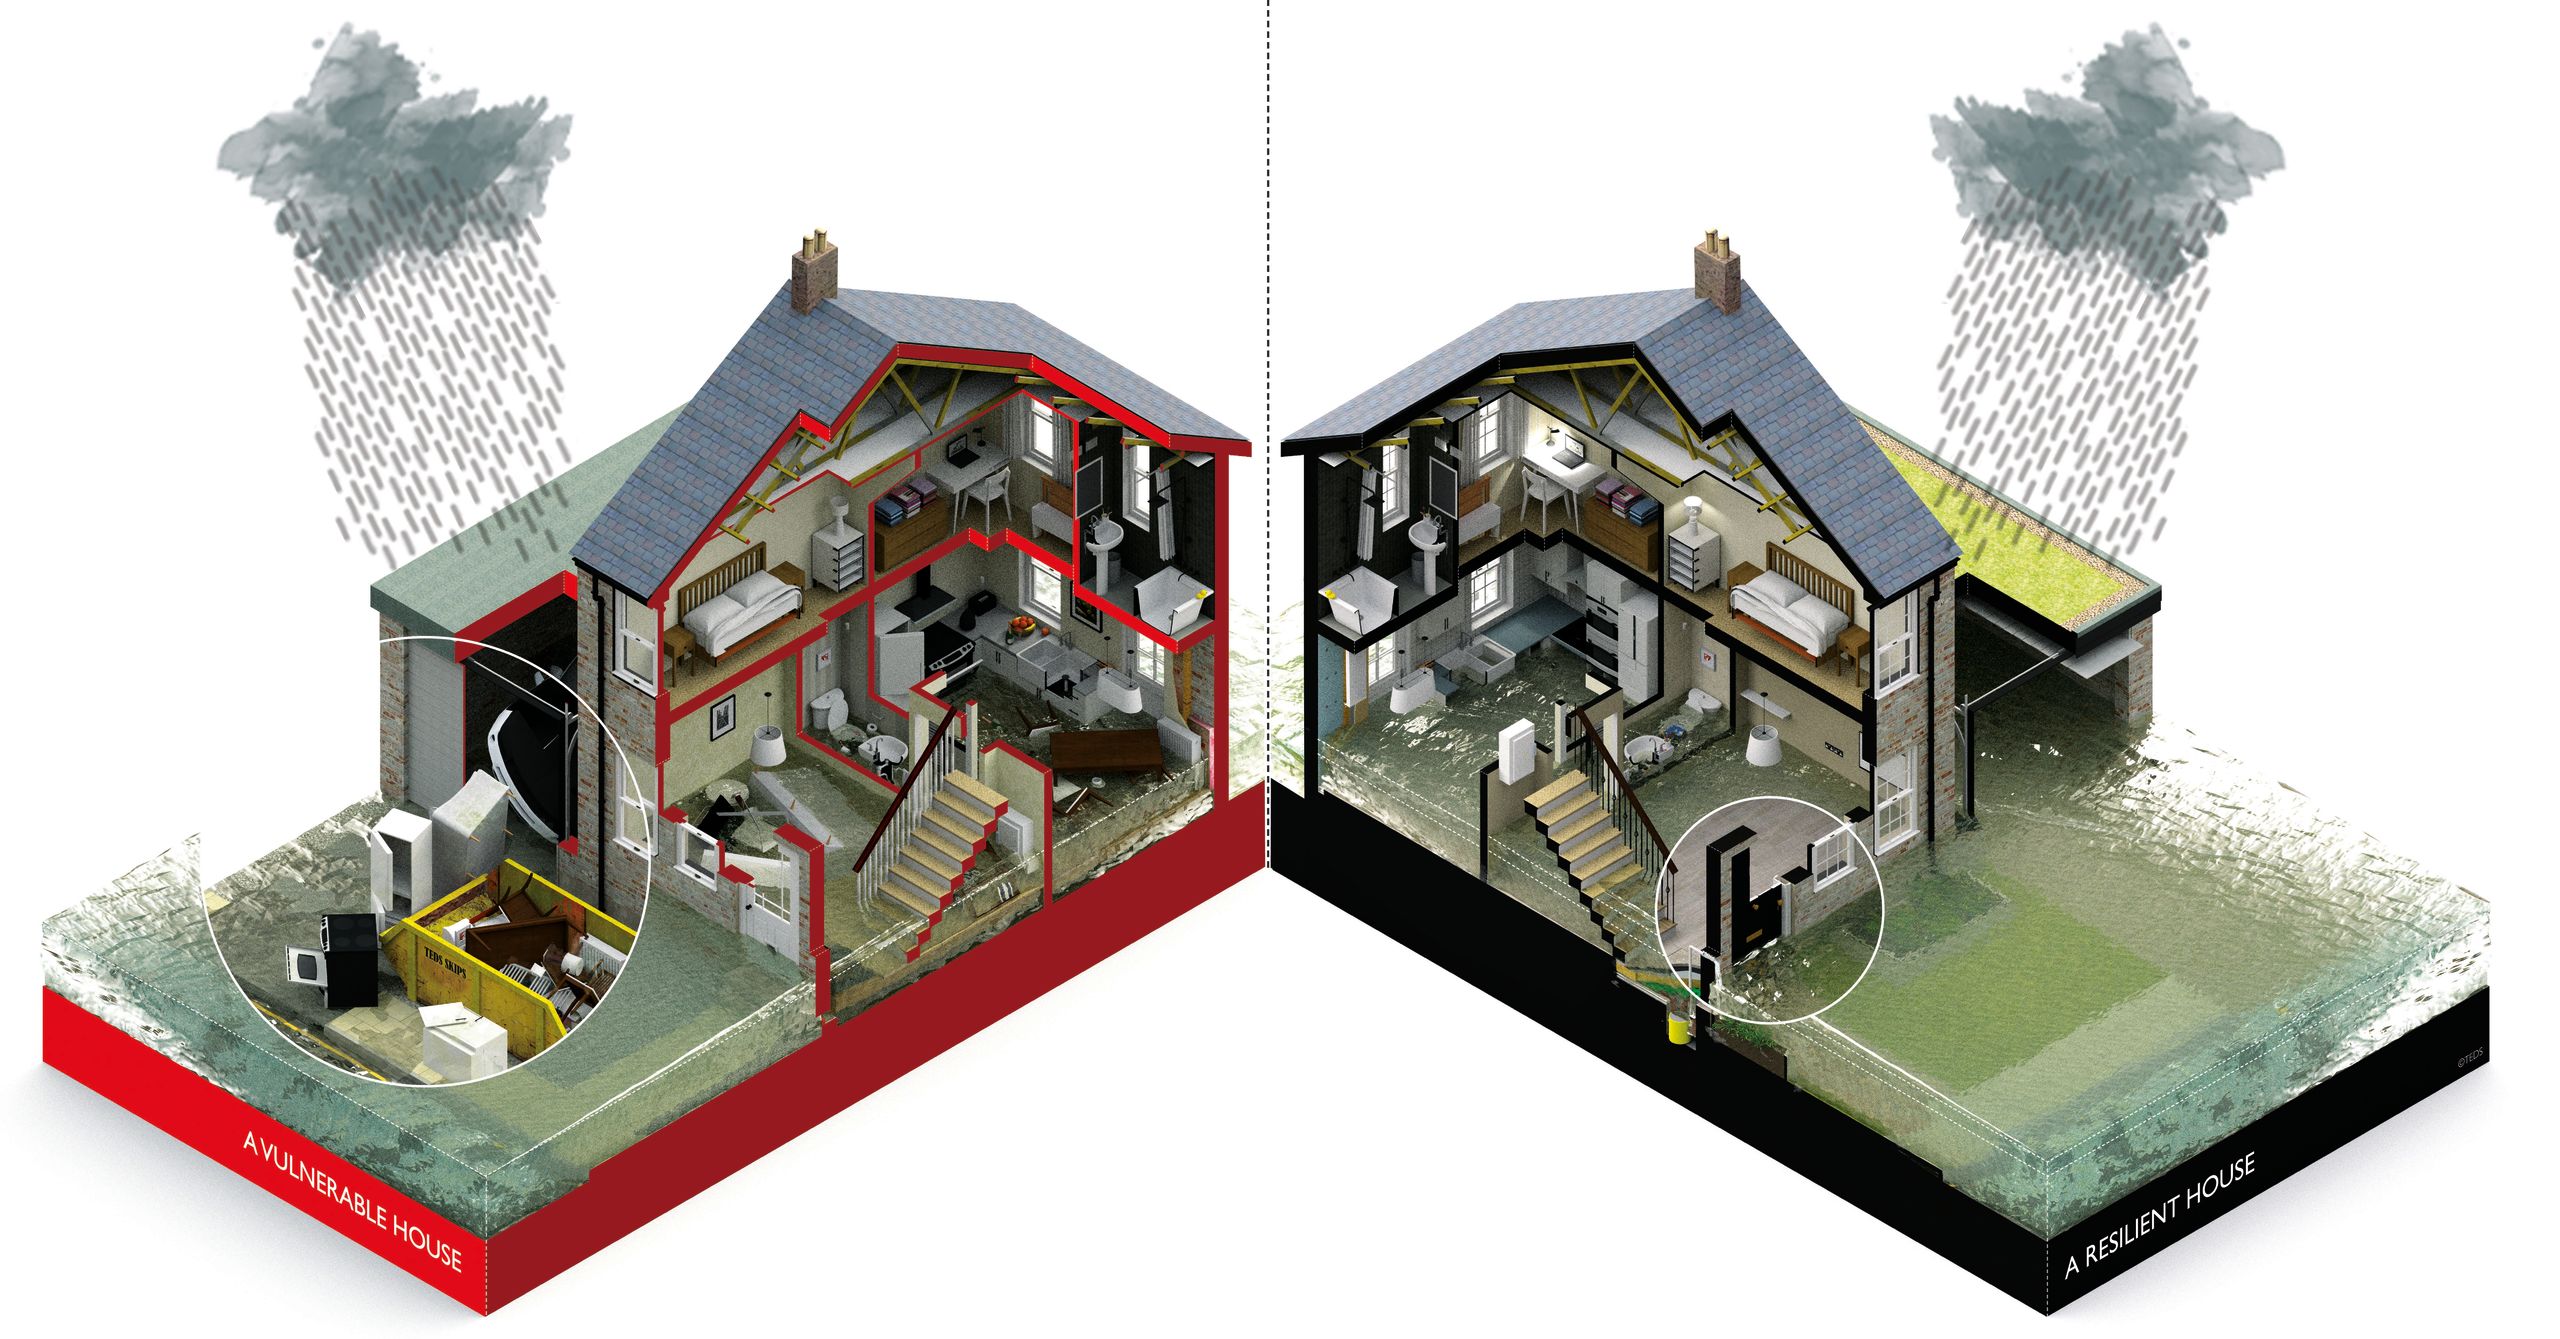 The impacts of flooding on a vulnerable and resilient house, featured in Retrofitting for Flood Resilience. Left: A vulnerable house. Right: A resilient house.